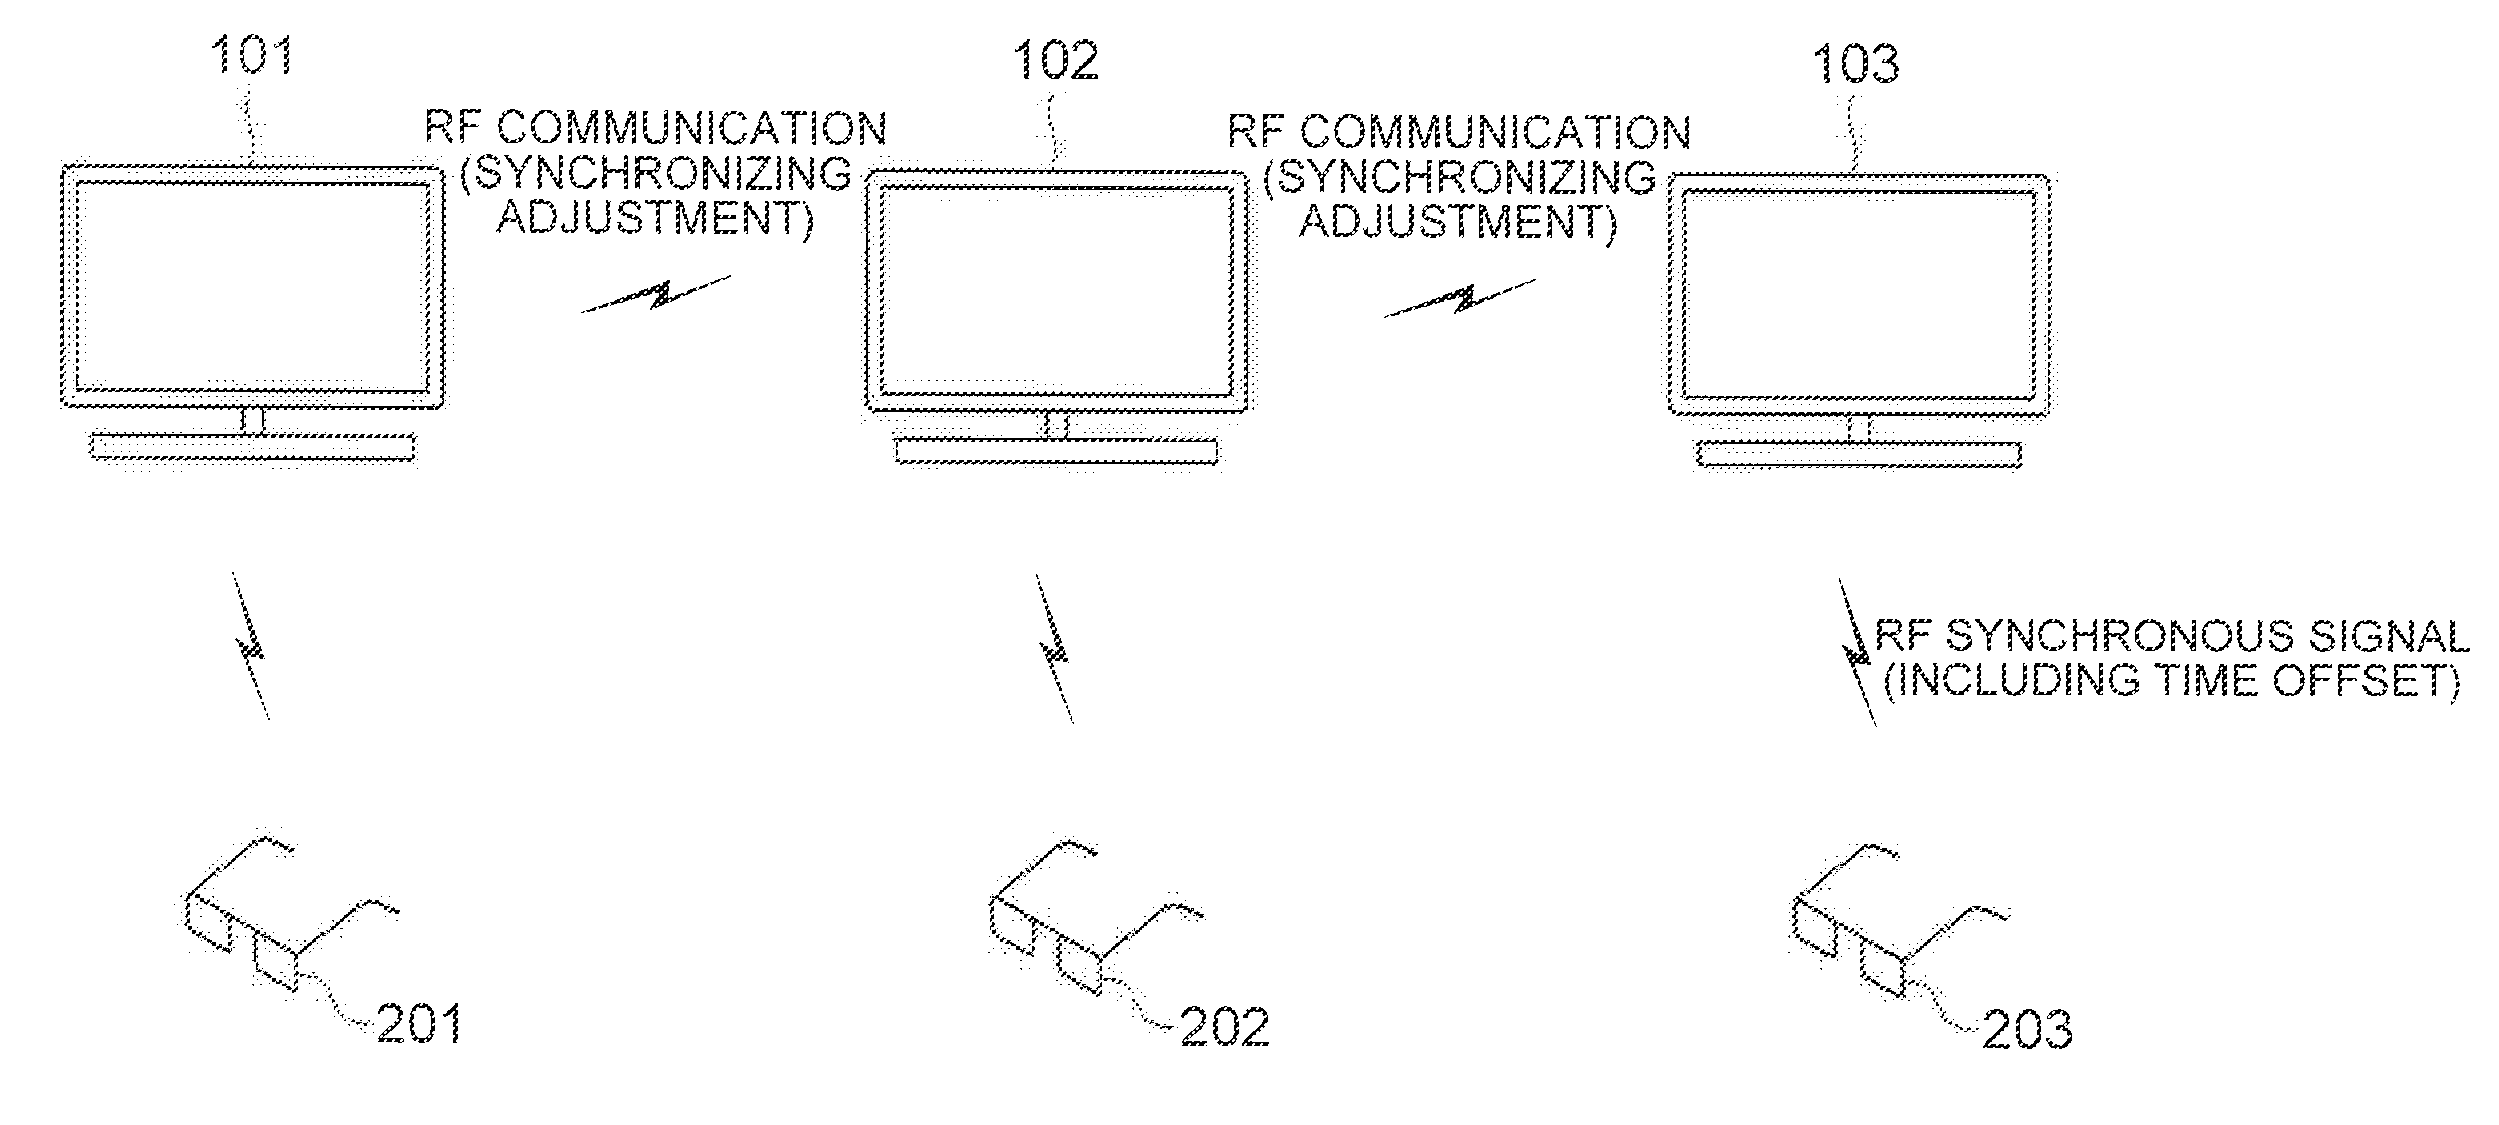 Three dimensional television and system using RF wireless communication and method for synchronizing of three dimensional television system using the same